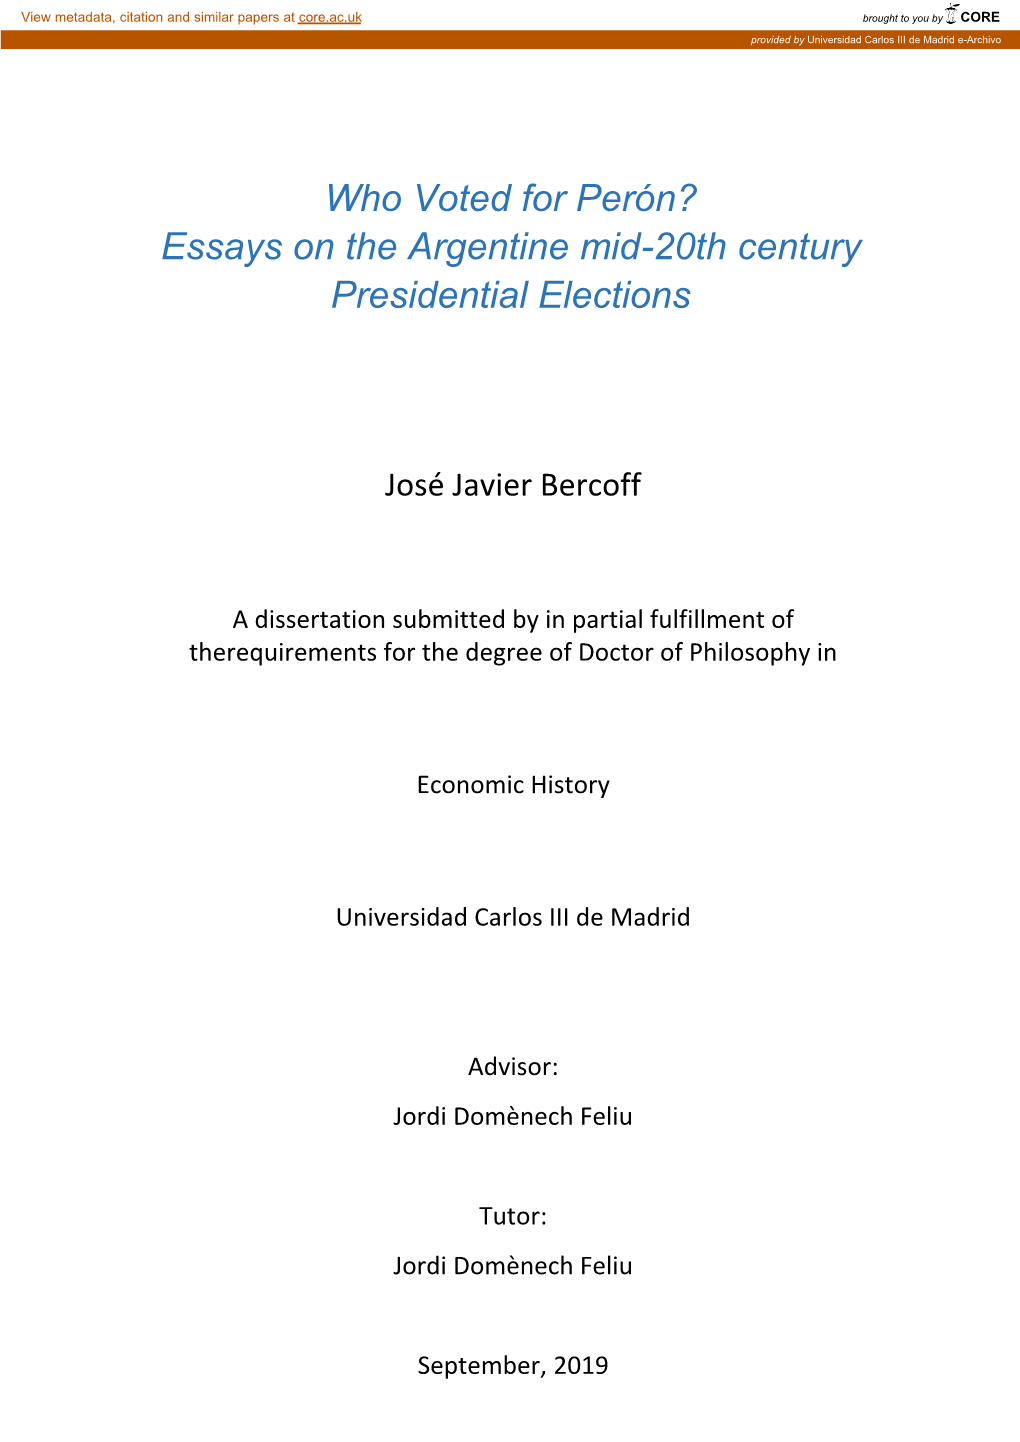 Who Voted for Perón? Essays on the Argentine Mid-20Th Century Presidential Elections